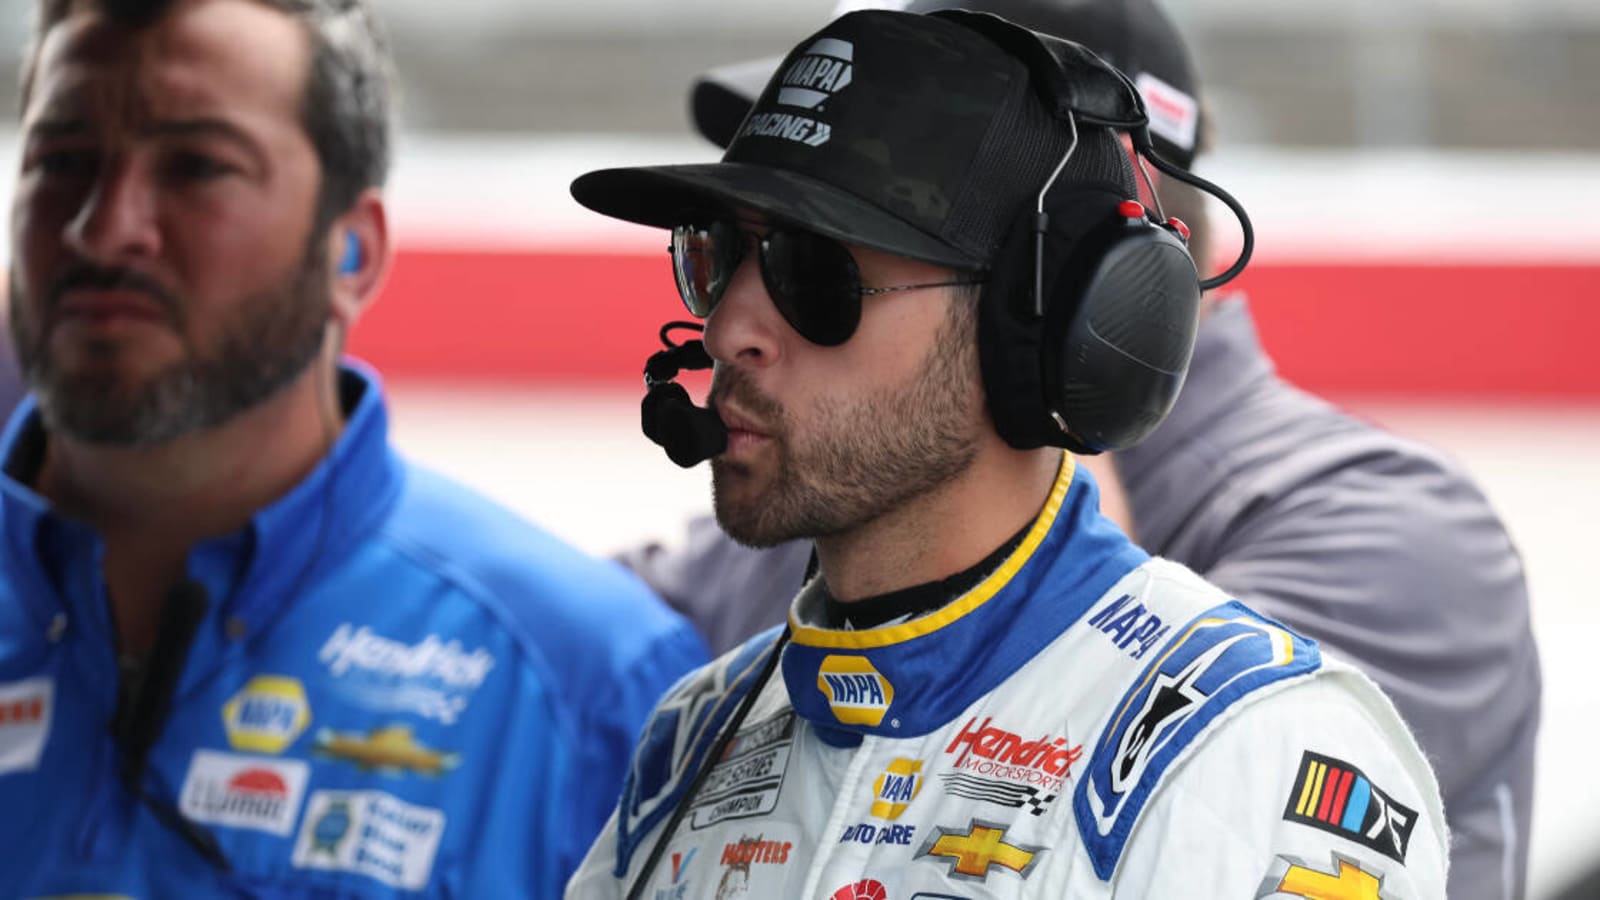 Chase Elliott unsure if he would participate in Season 2 of ‘NASCAR: Full Speed’: ‘I just want to go fast’